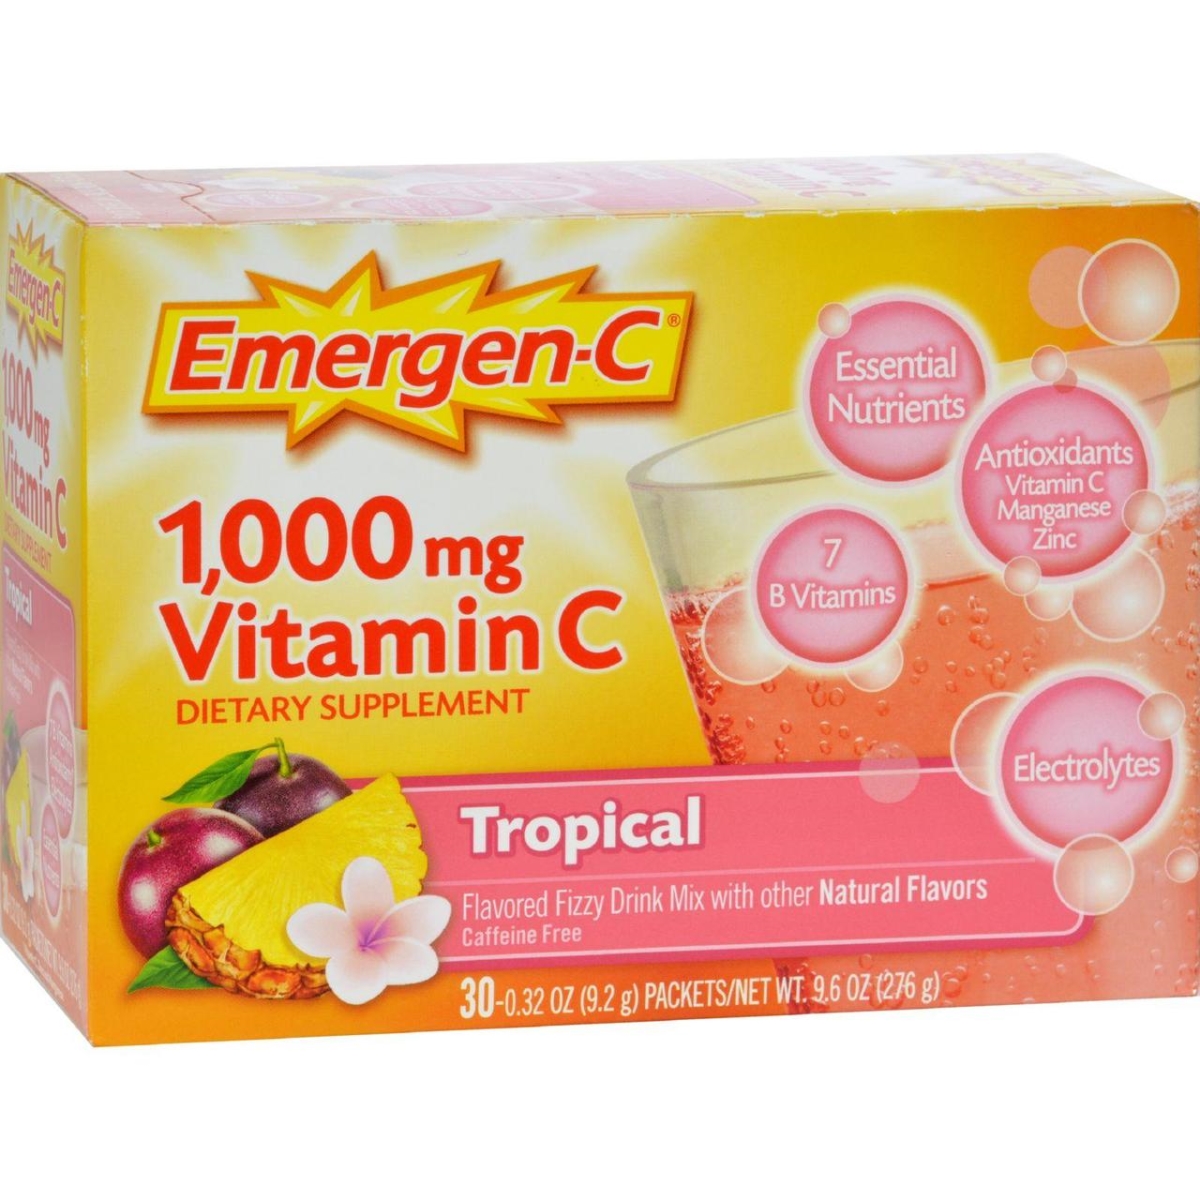 Alacer Hg0351288 1000 Mg Emergen-c Vitamin C Fizzy Drink Mix Tropical, 30 Packet